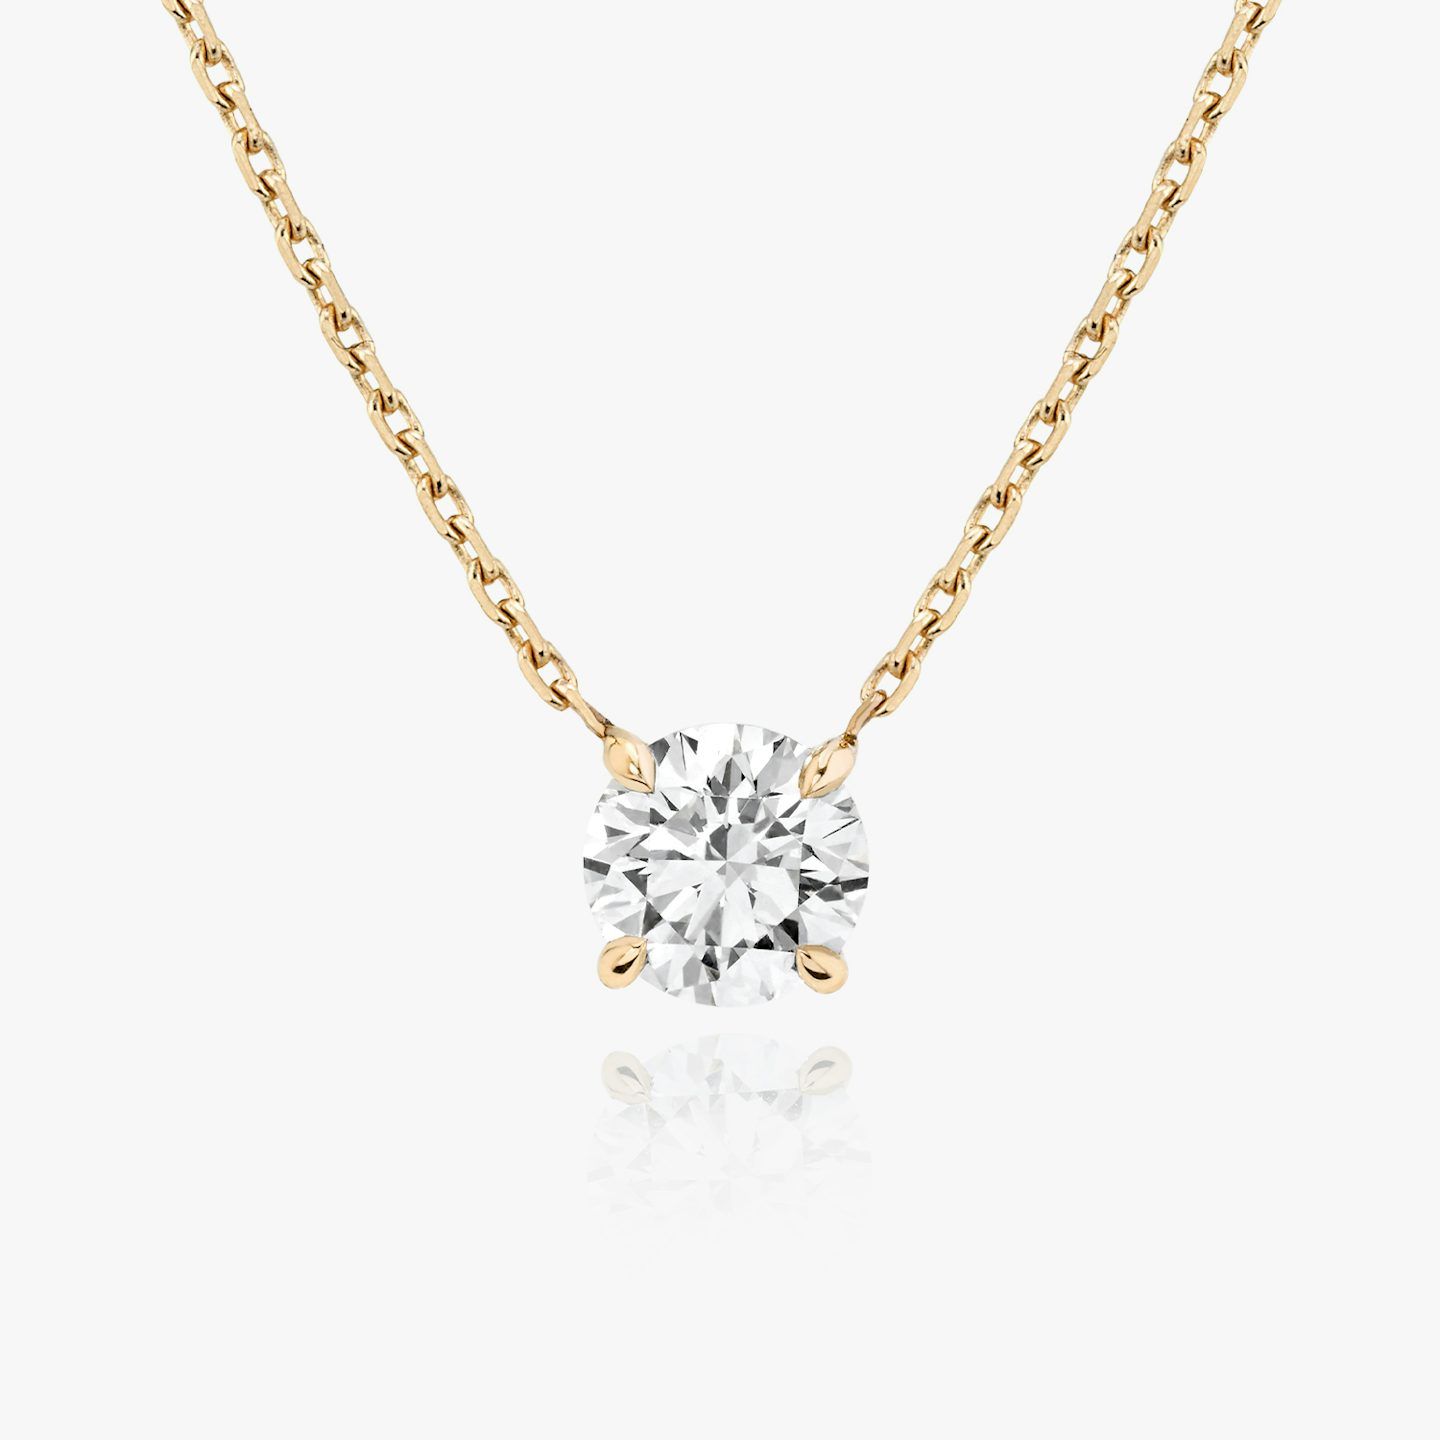 VRAI Solitaire Necklace | Round Brilliant | 14k | 14k Rose Gold | Carat weight: 1/2